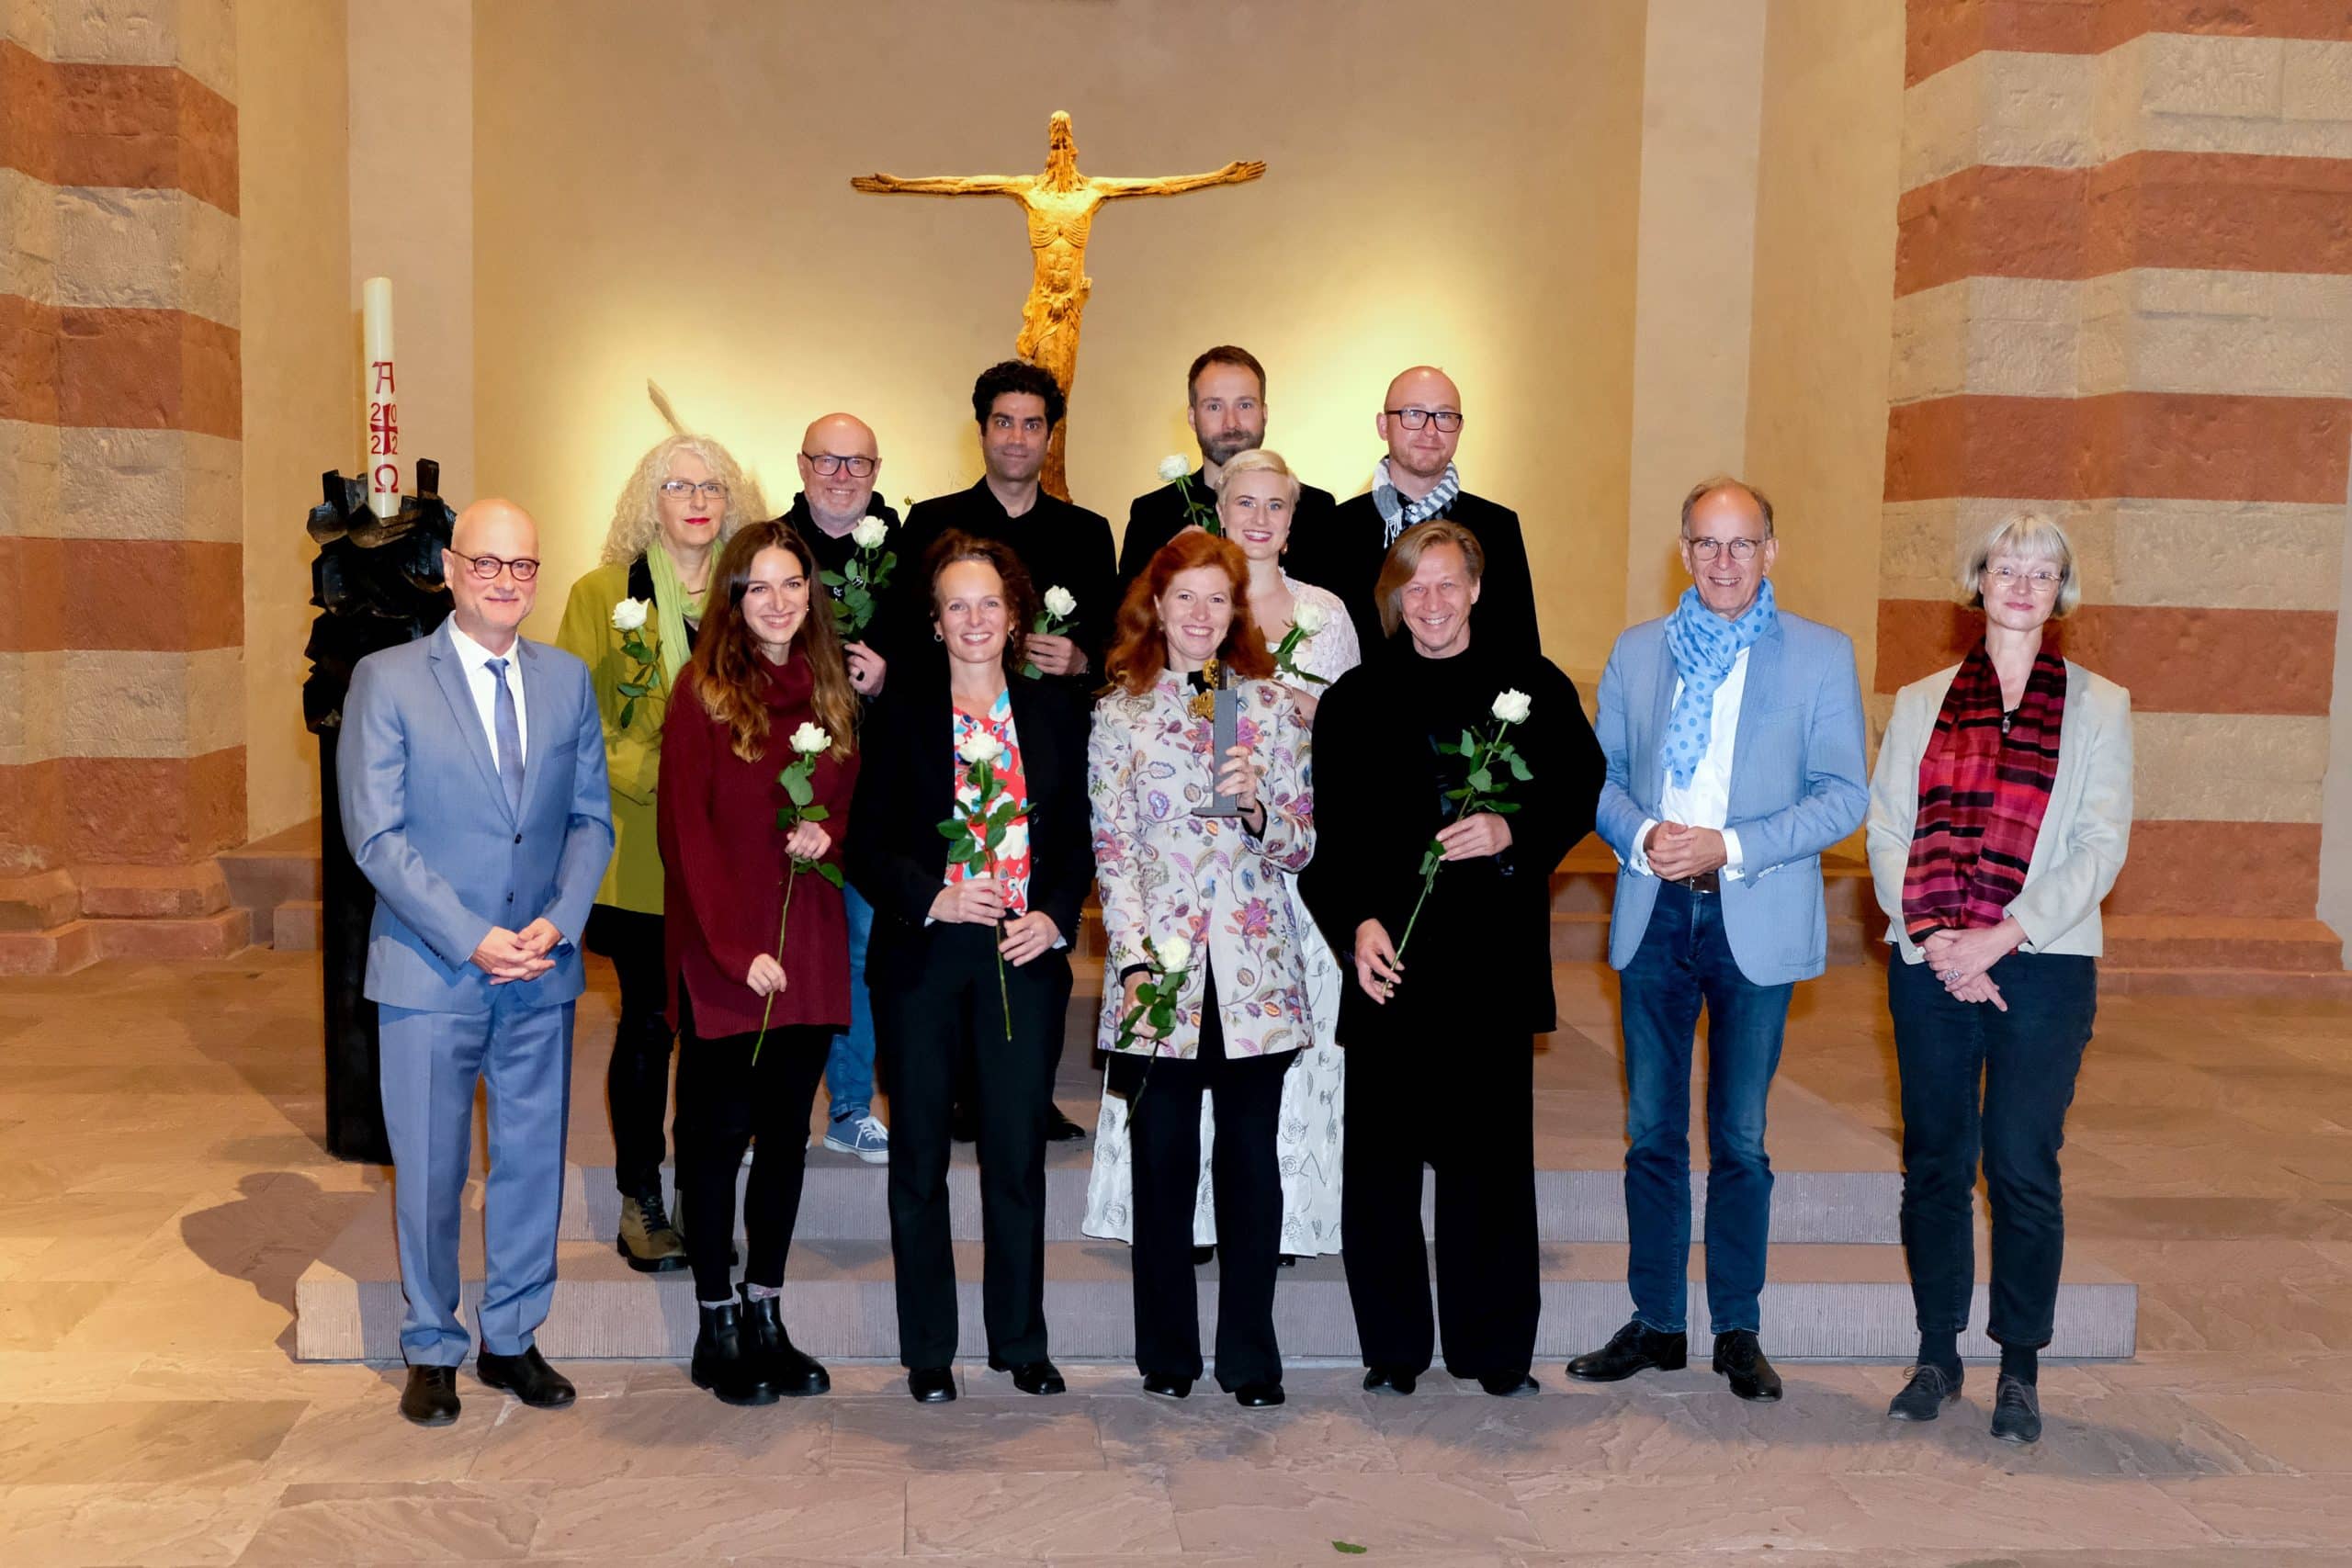 Ensemble Megaphon awarded the 2022 Culture Prize of the Regional Church!